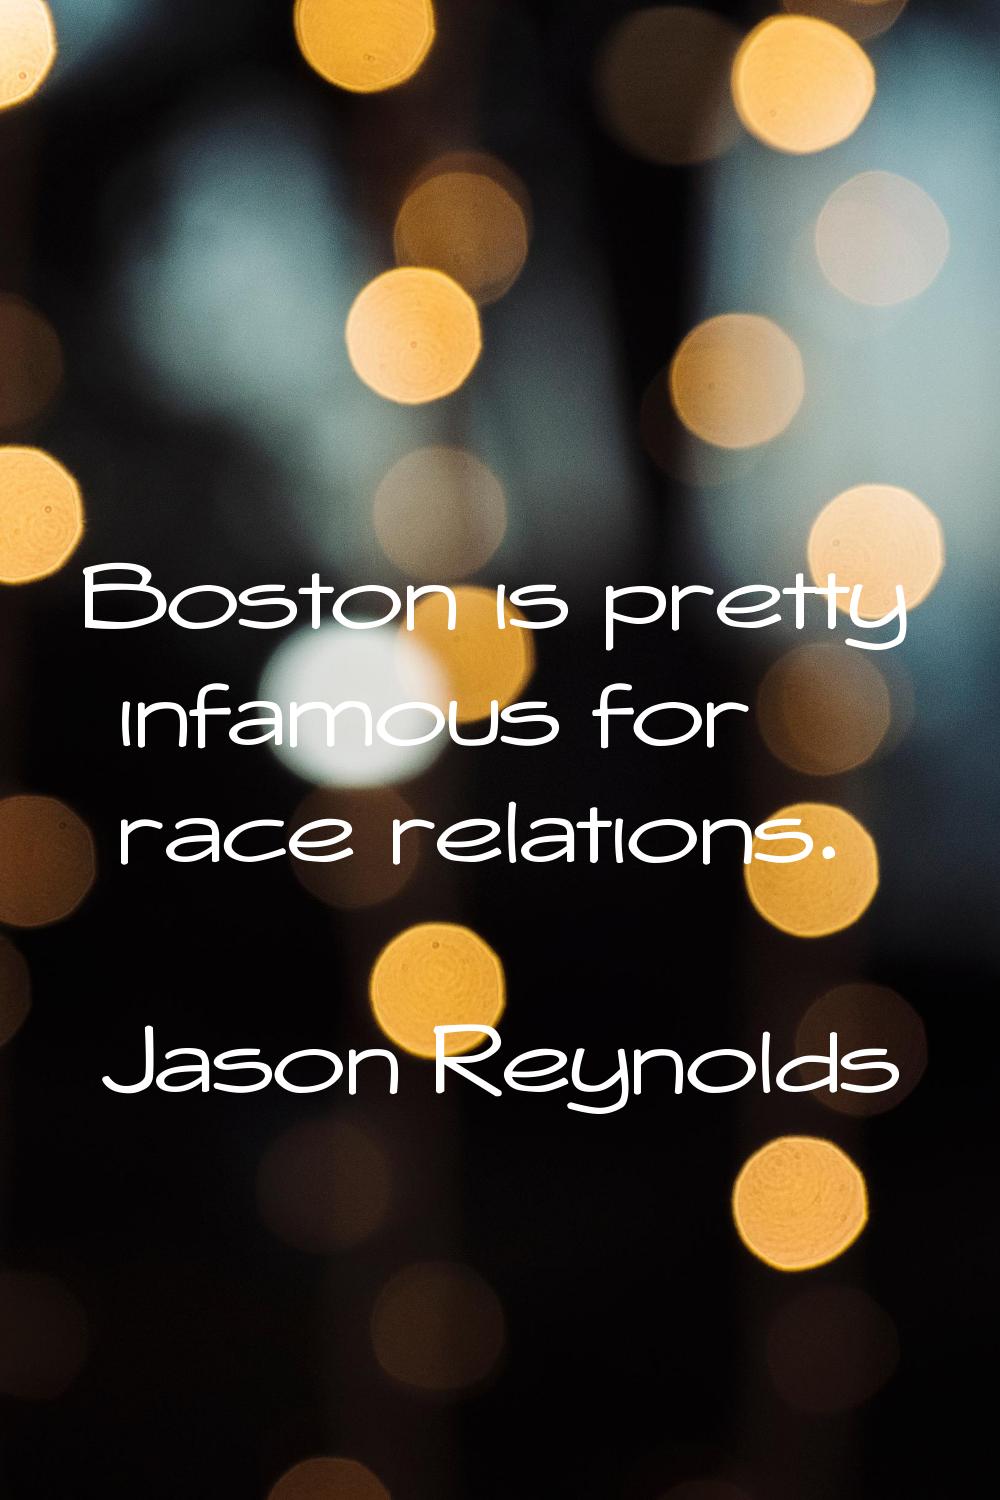 Boston is pretty infamous for race relations.